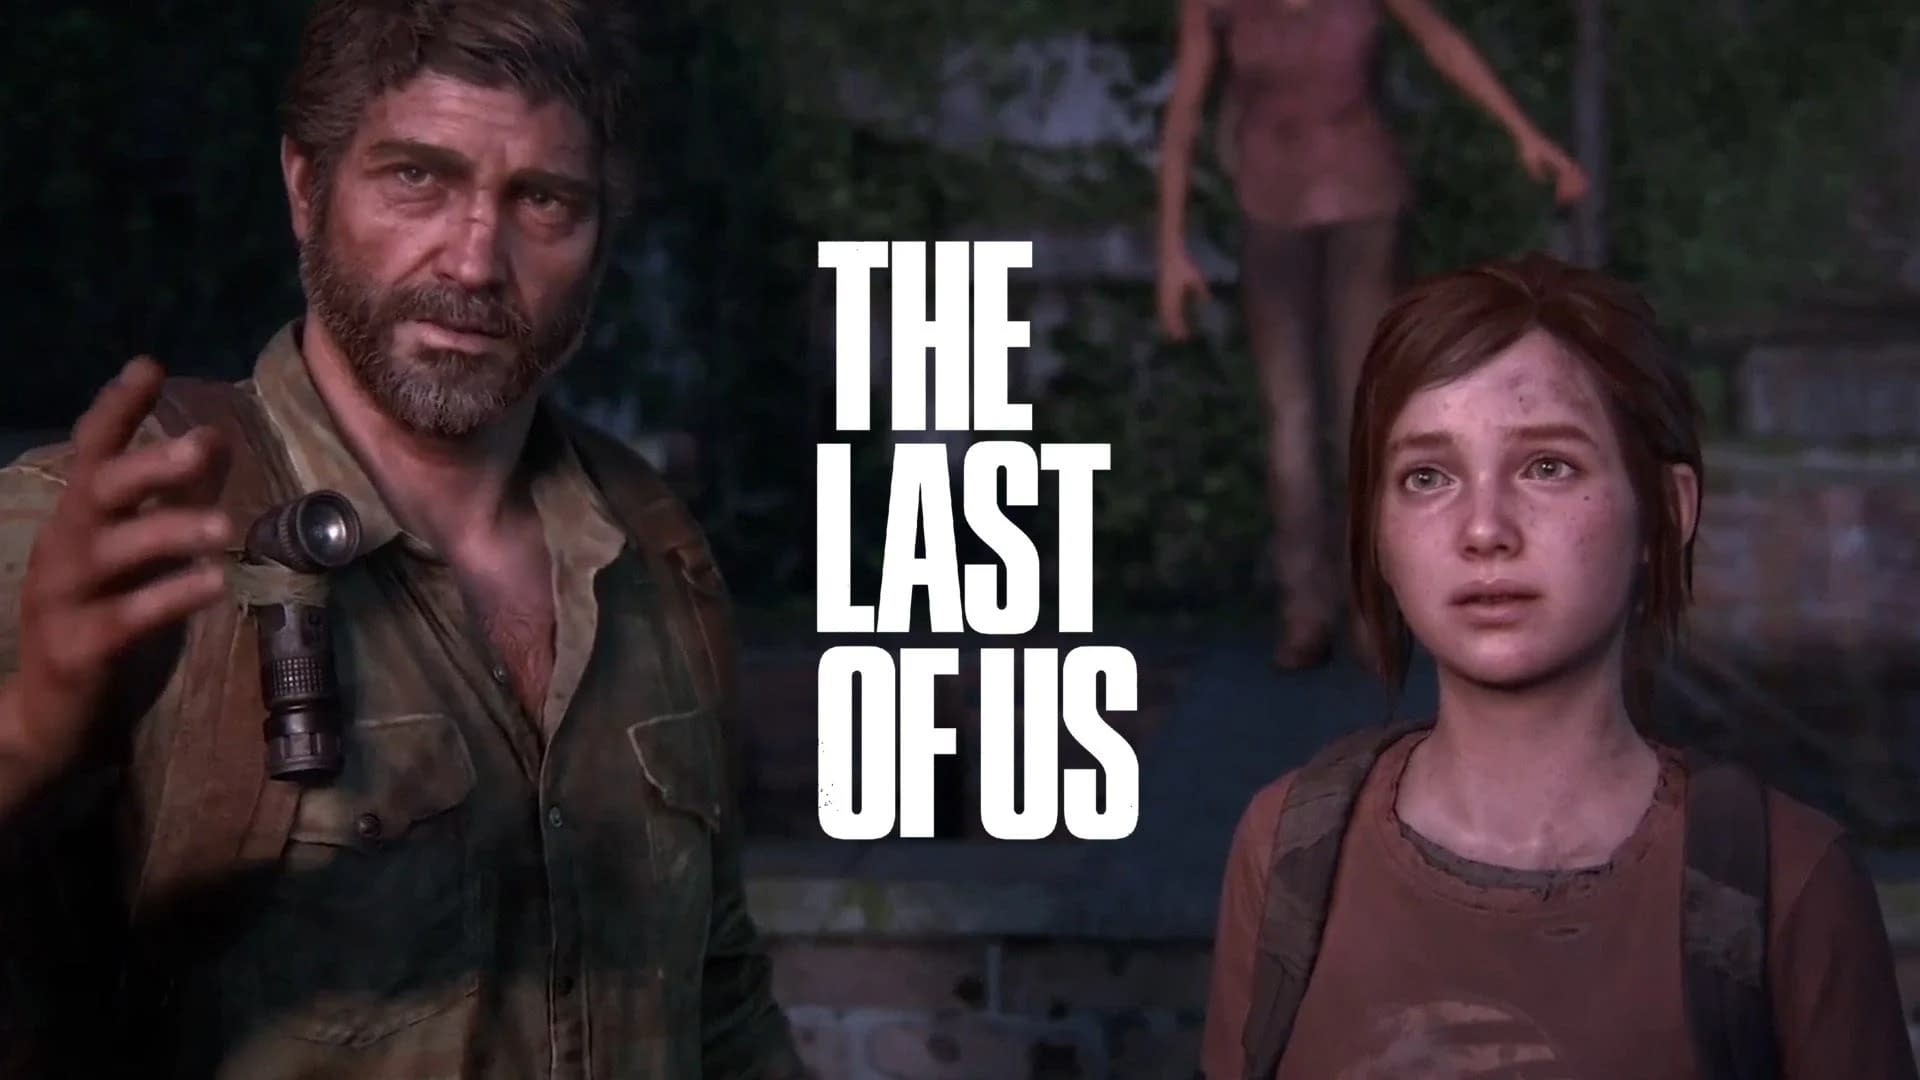 Have The Last of Us requested PC version?